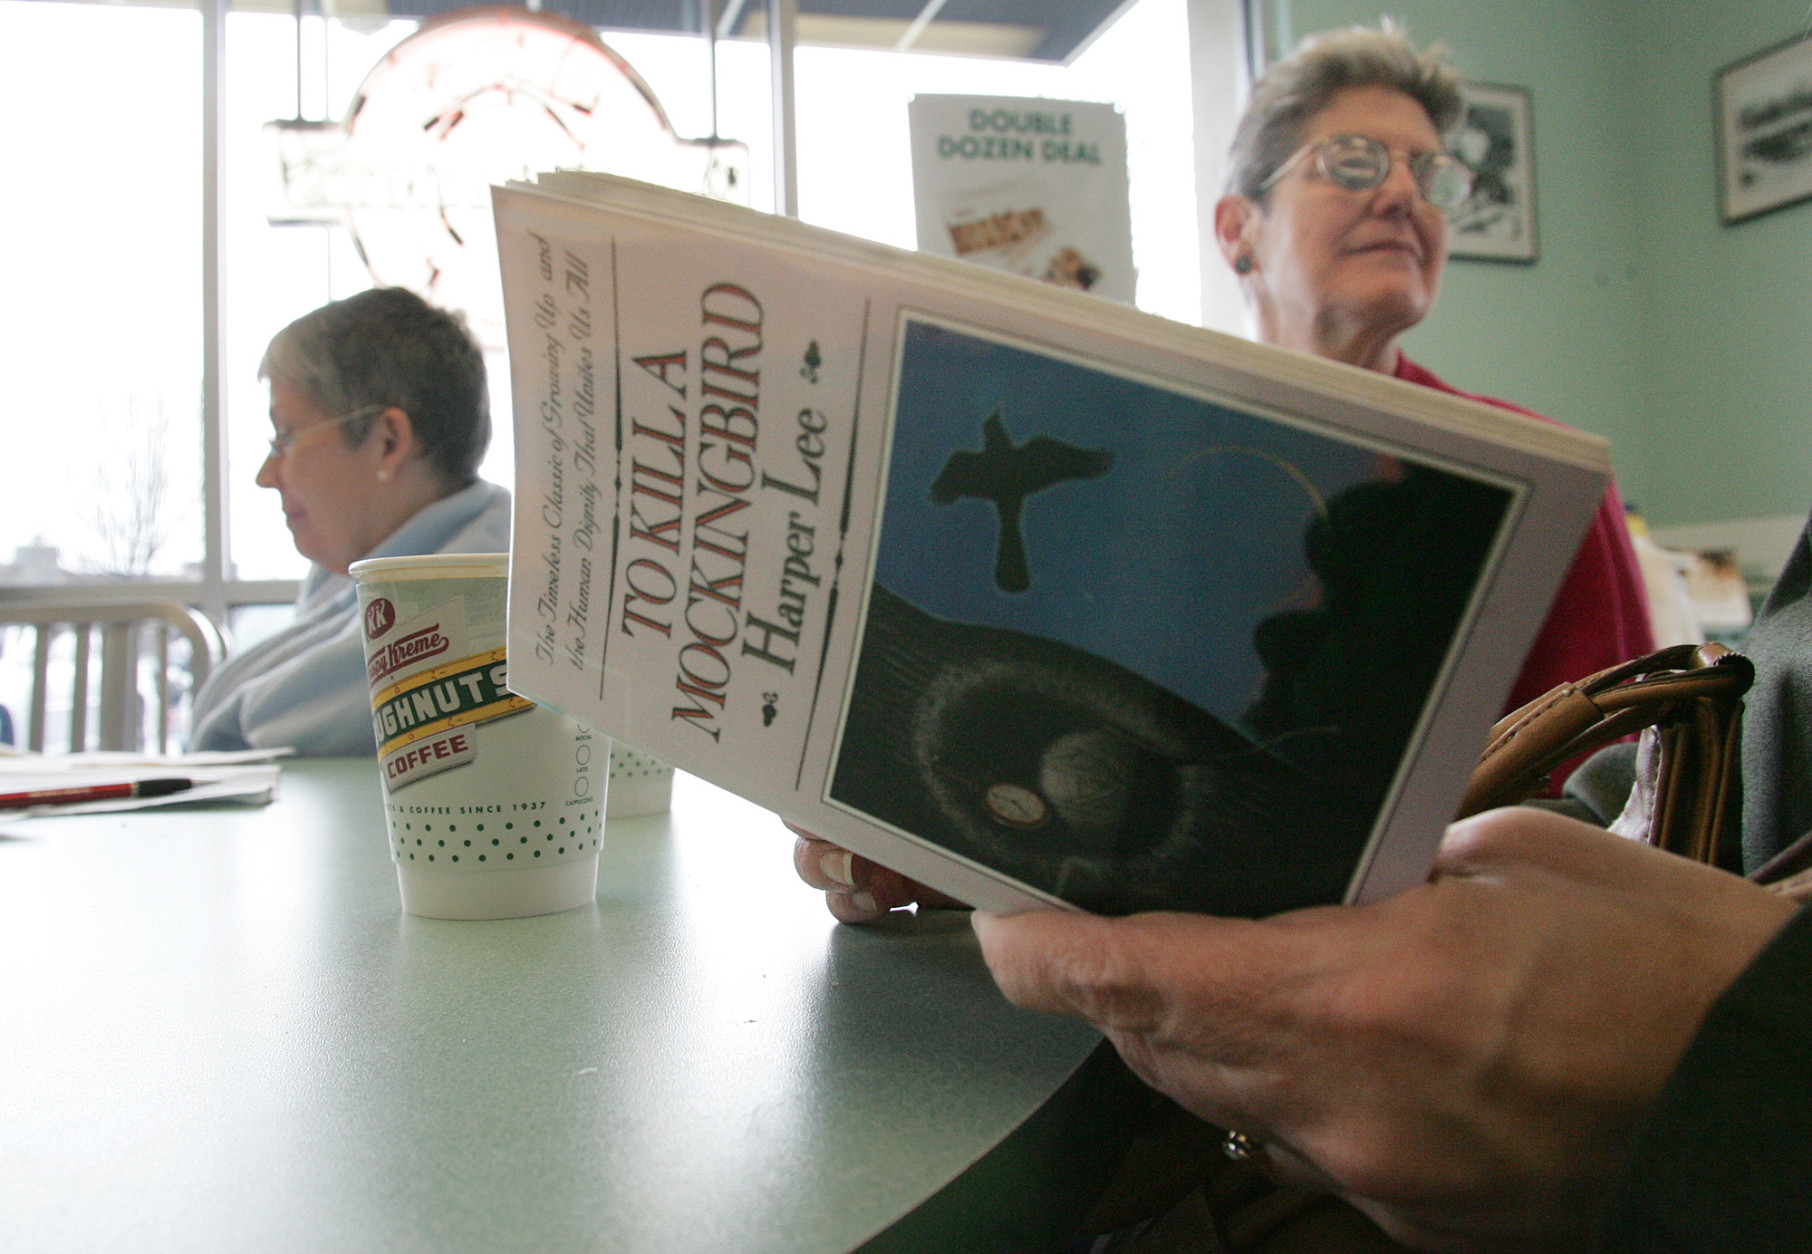 Sandra Lindley, right and Lydia Kuhn behind listens to a reader at the Krispy Kreme shop Monday, March 6, 2006, in Fresno, Calif. Kuhn and others like her spent the morning reading "To Kill a Mockingbird," as part of The National Endowment for the Arts effort to get American's to read more. The program helped kick off a month's worth of programs meant to take the classic novel where the readers are; doughnut shops, retirement homes, downtown bars, museums and yes, even libraries.(AP Photo/Gary Kazanjian)